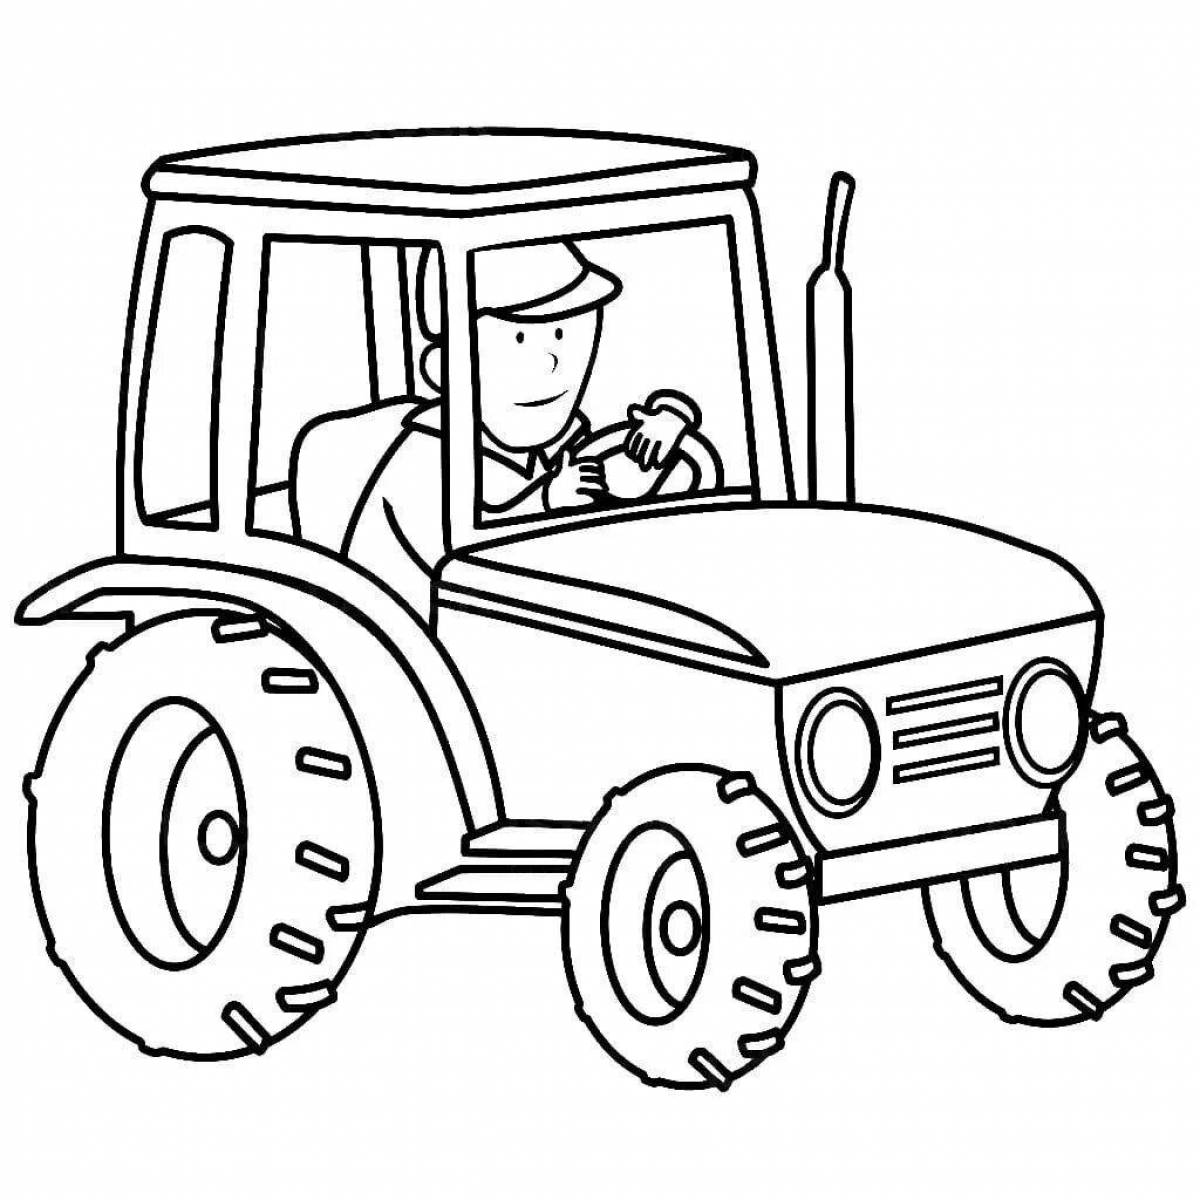 Blessed tractor coloring page